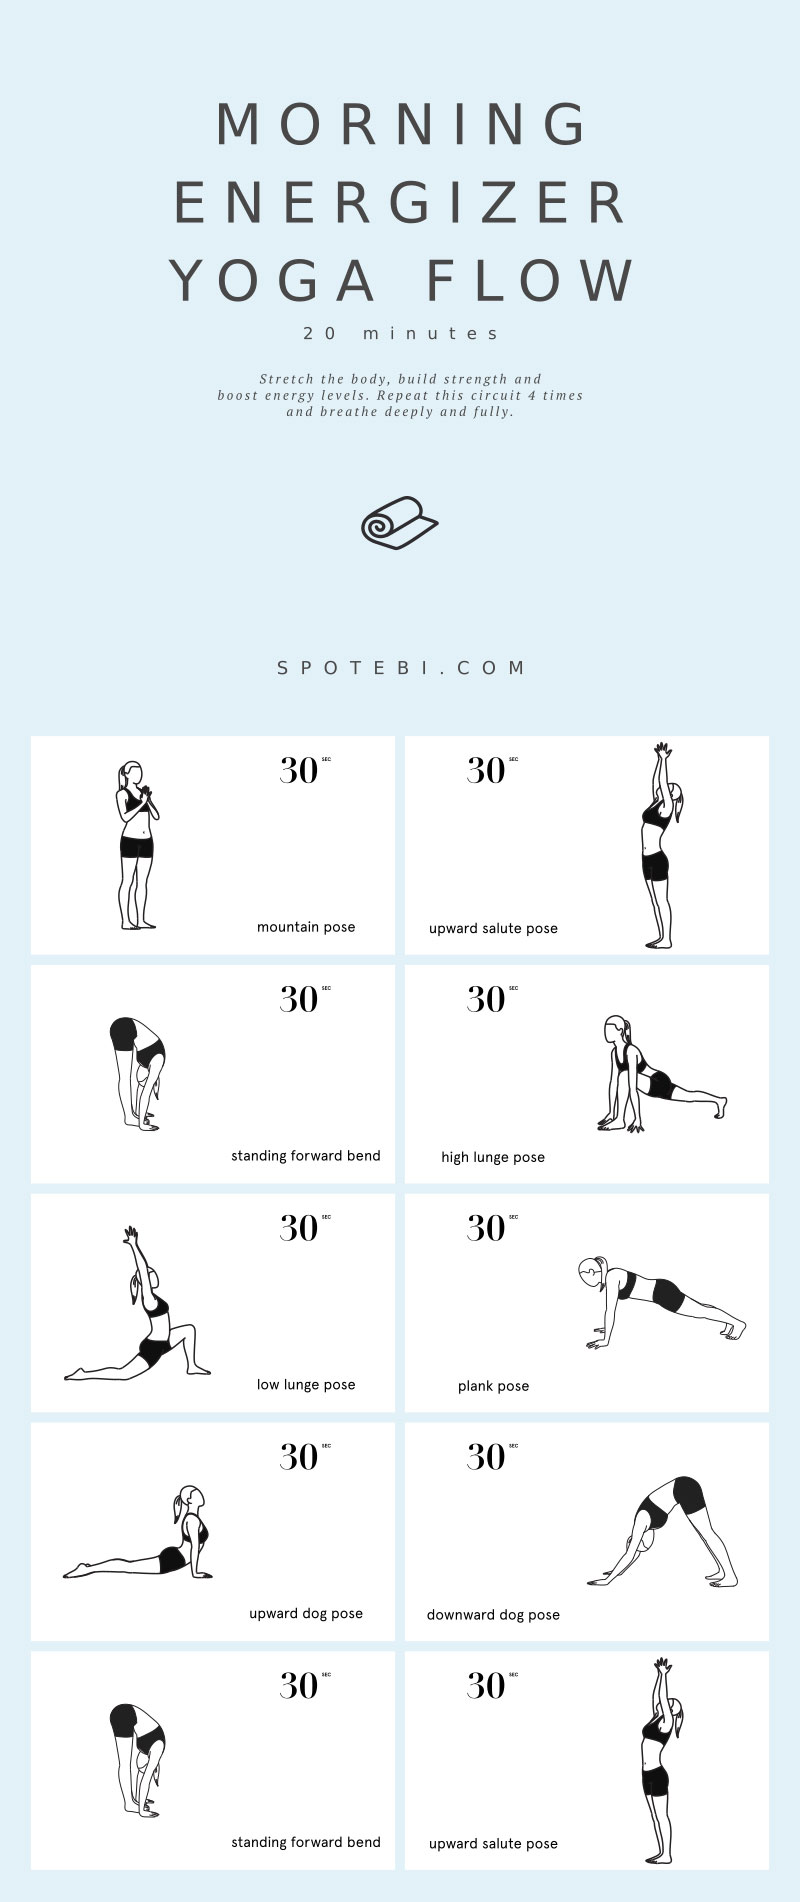 Stretch the entire front and back of your body, build strength and boost energy levels with this 20-minute Full Body Energizing Flow. A morning yoga routine that gives you the amount of stretch and focus you need, to have a calm and productive day. https://www.spotebi.com/yoga-sequences/morning-energizer/